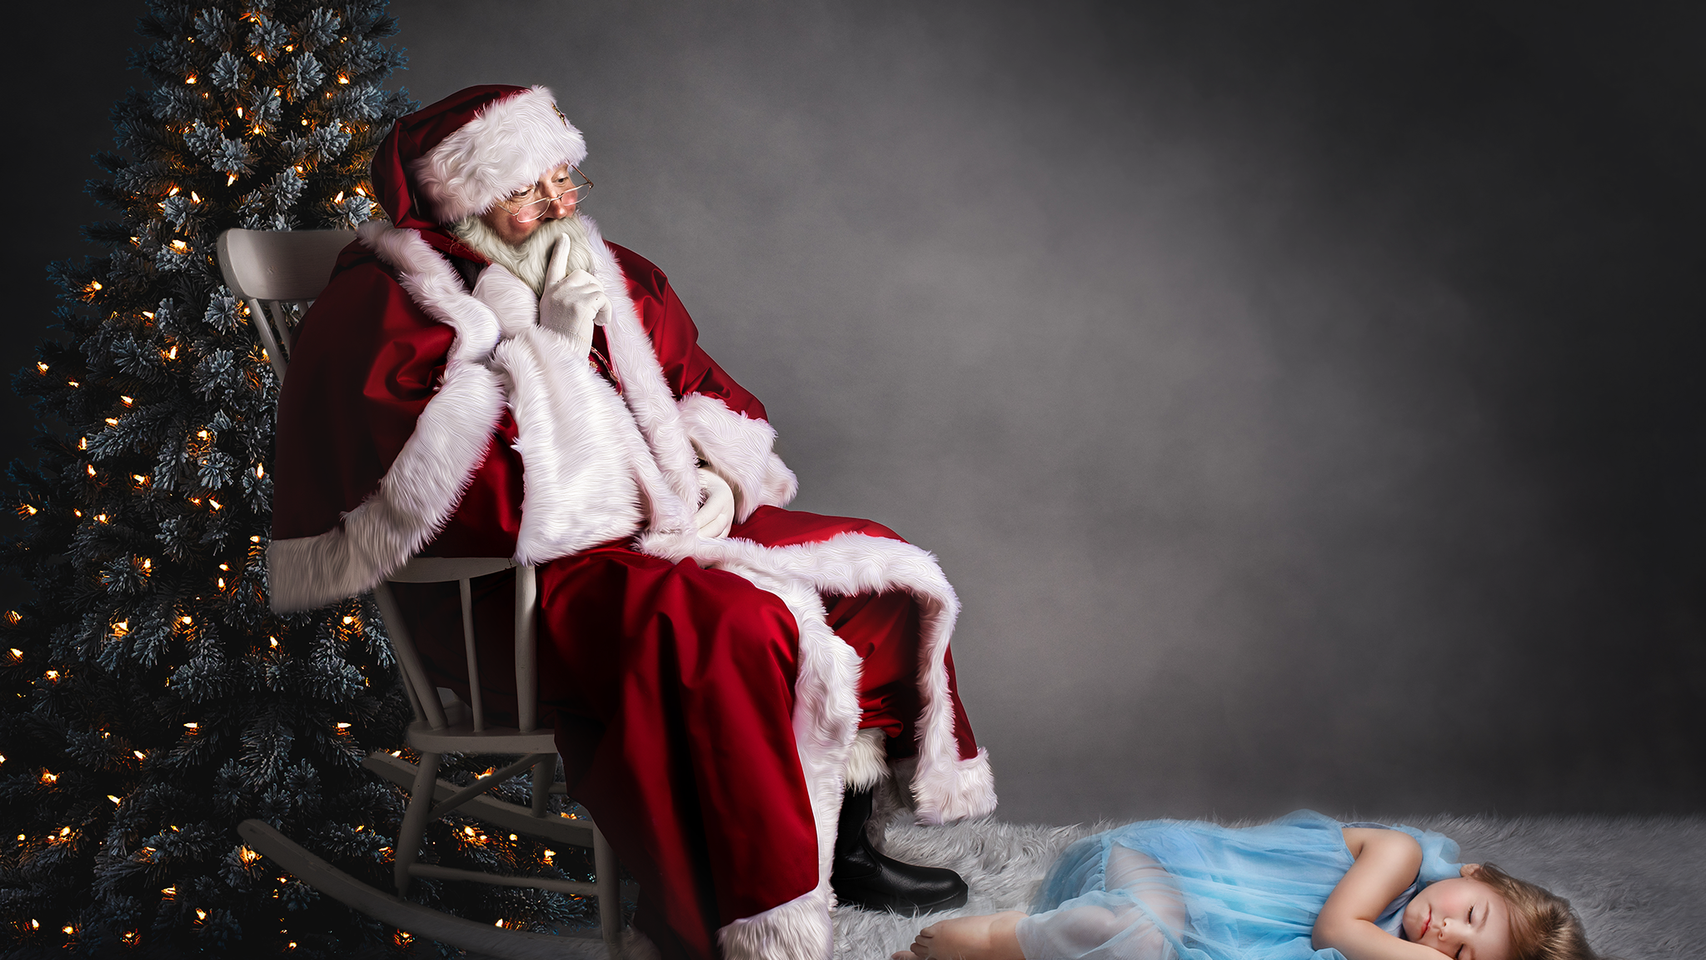 How to place your subject-Santa says shhhh!